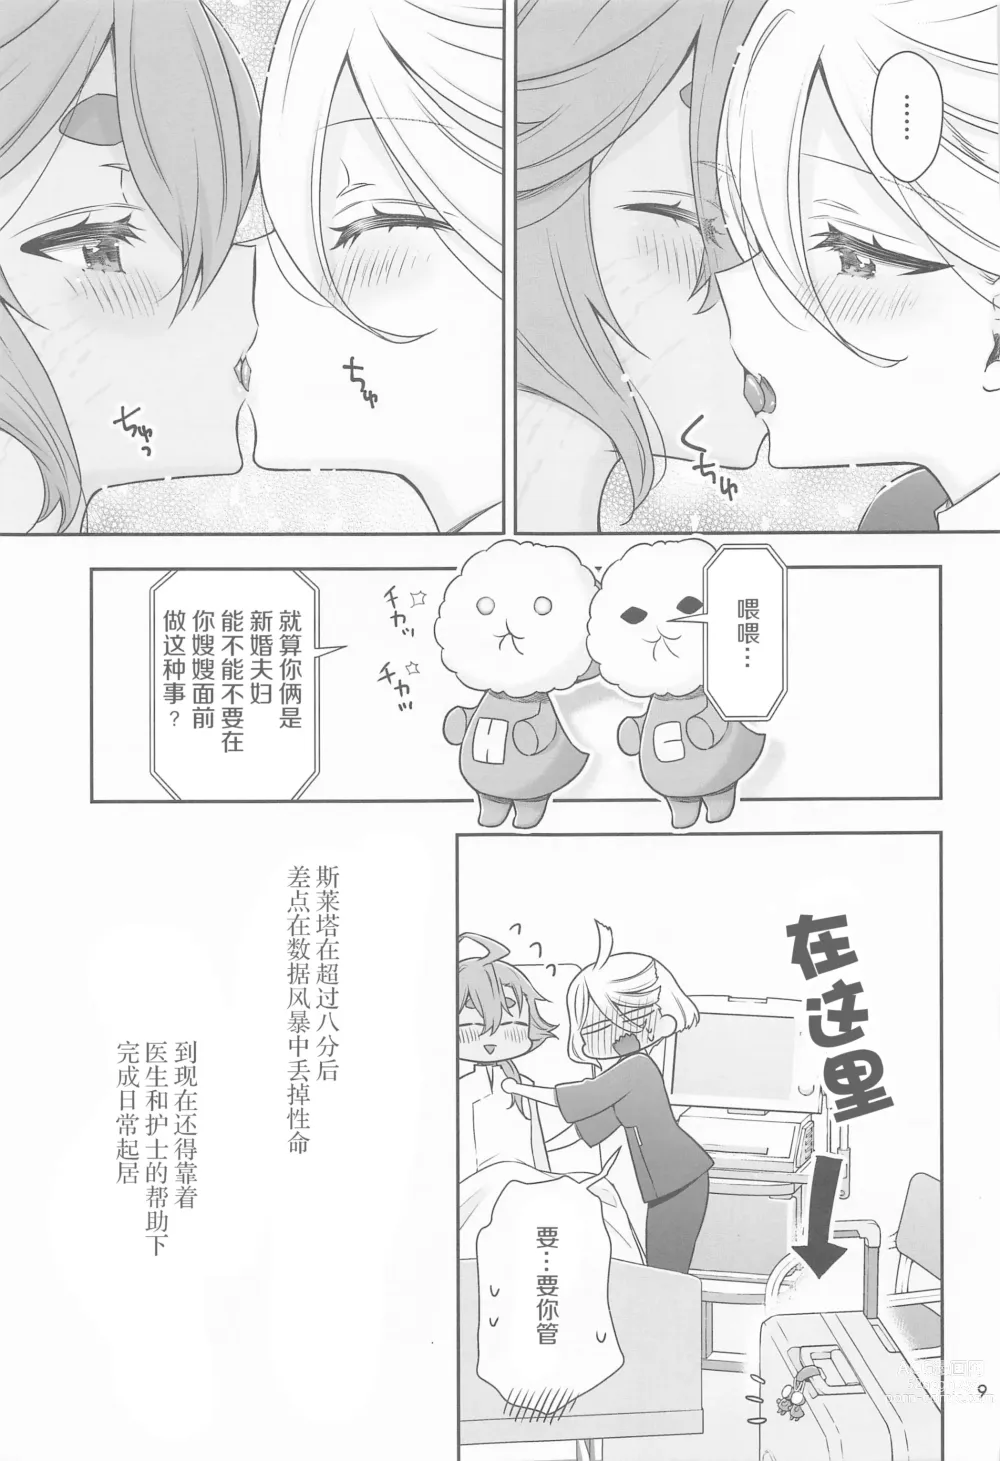 Page 9 of doujinshi 祝福之日